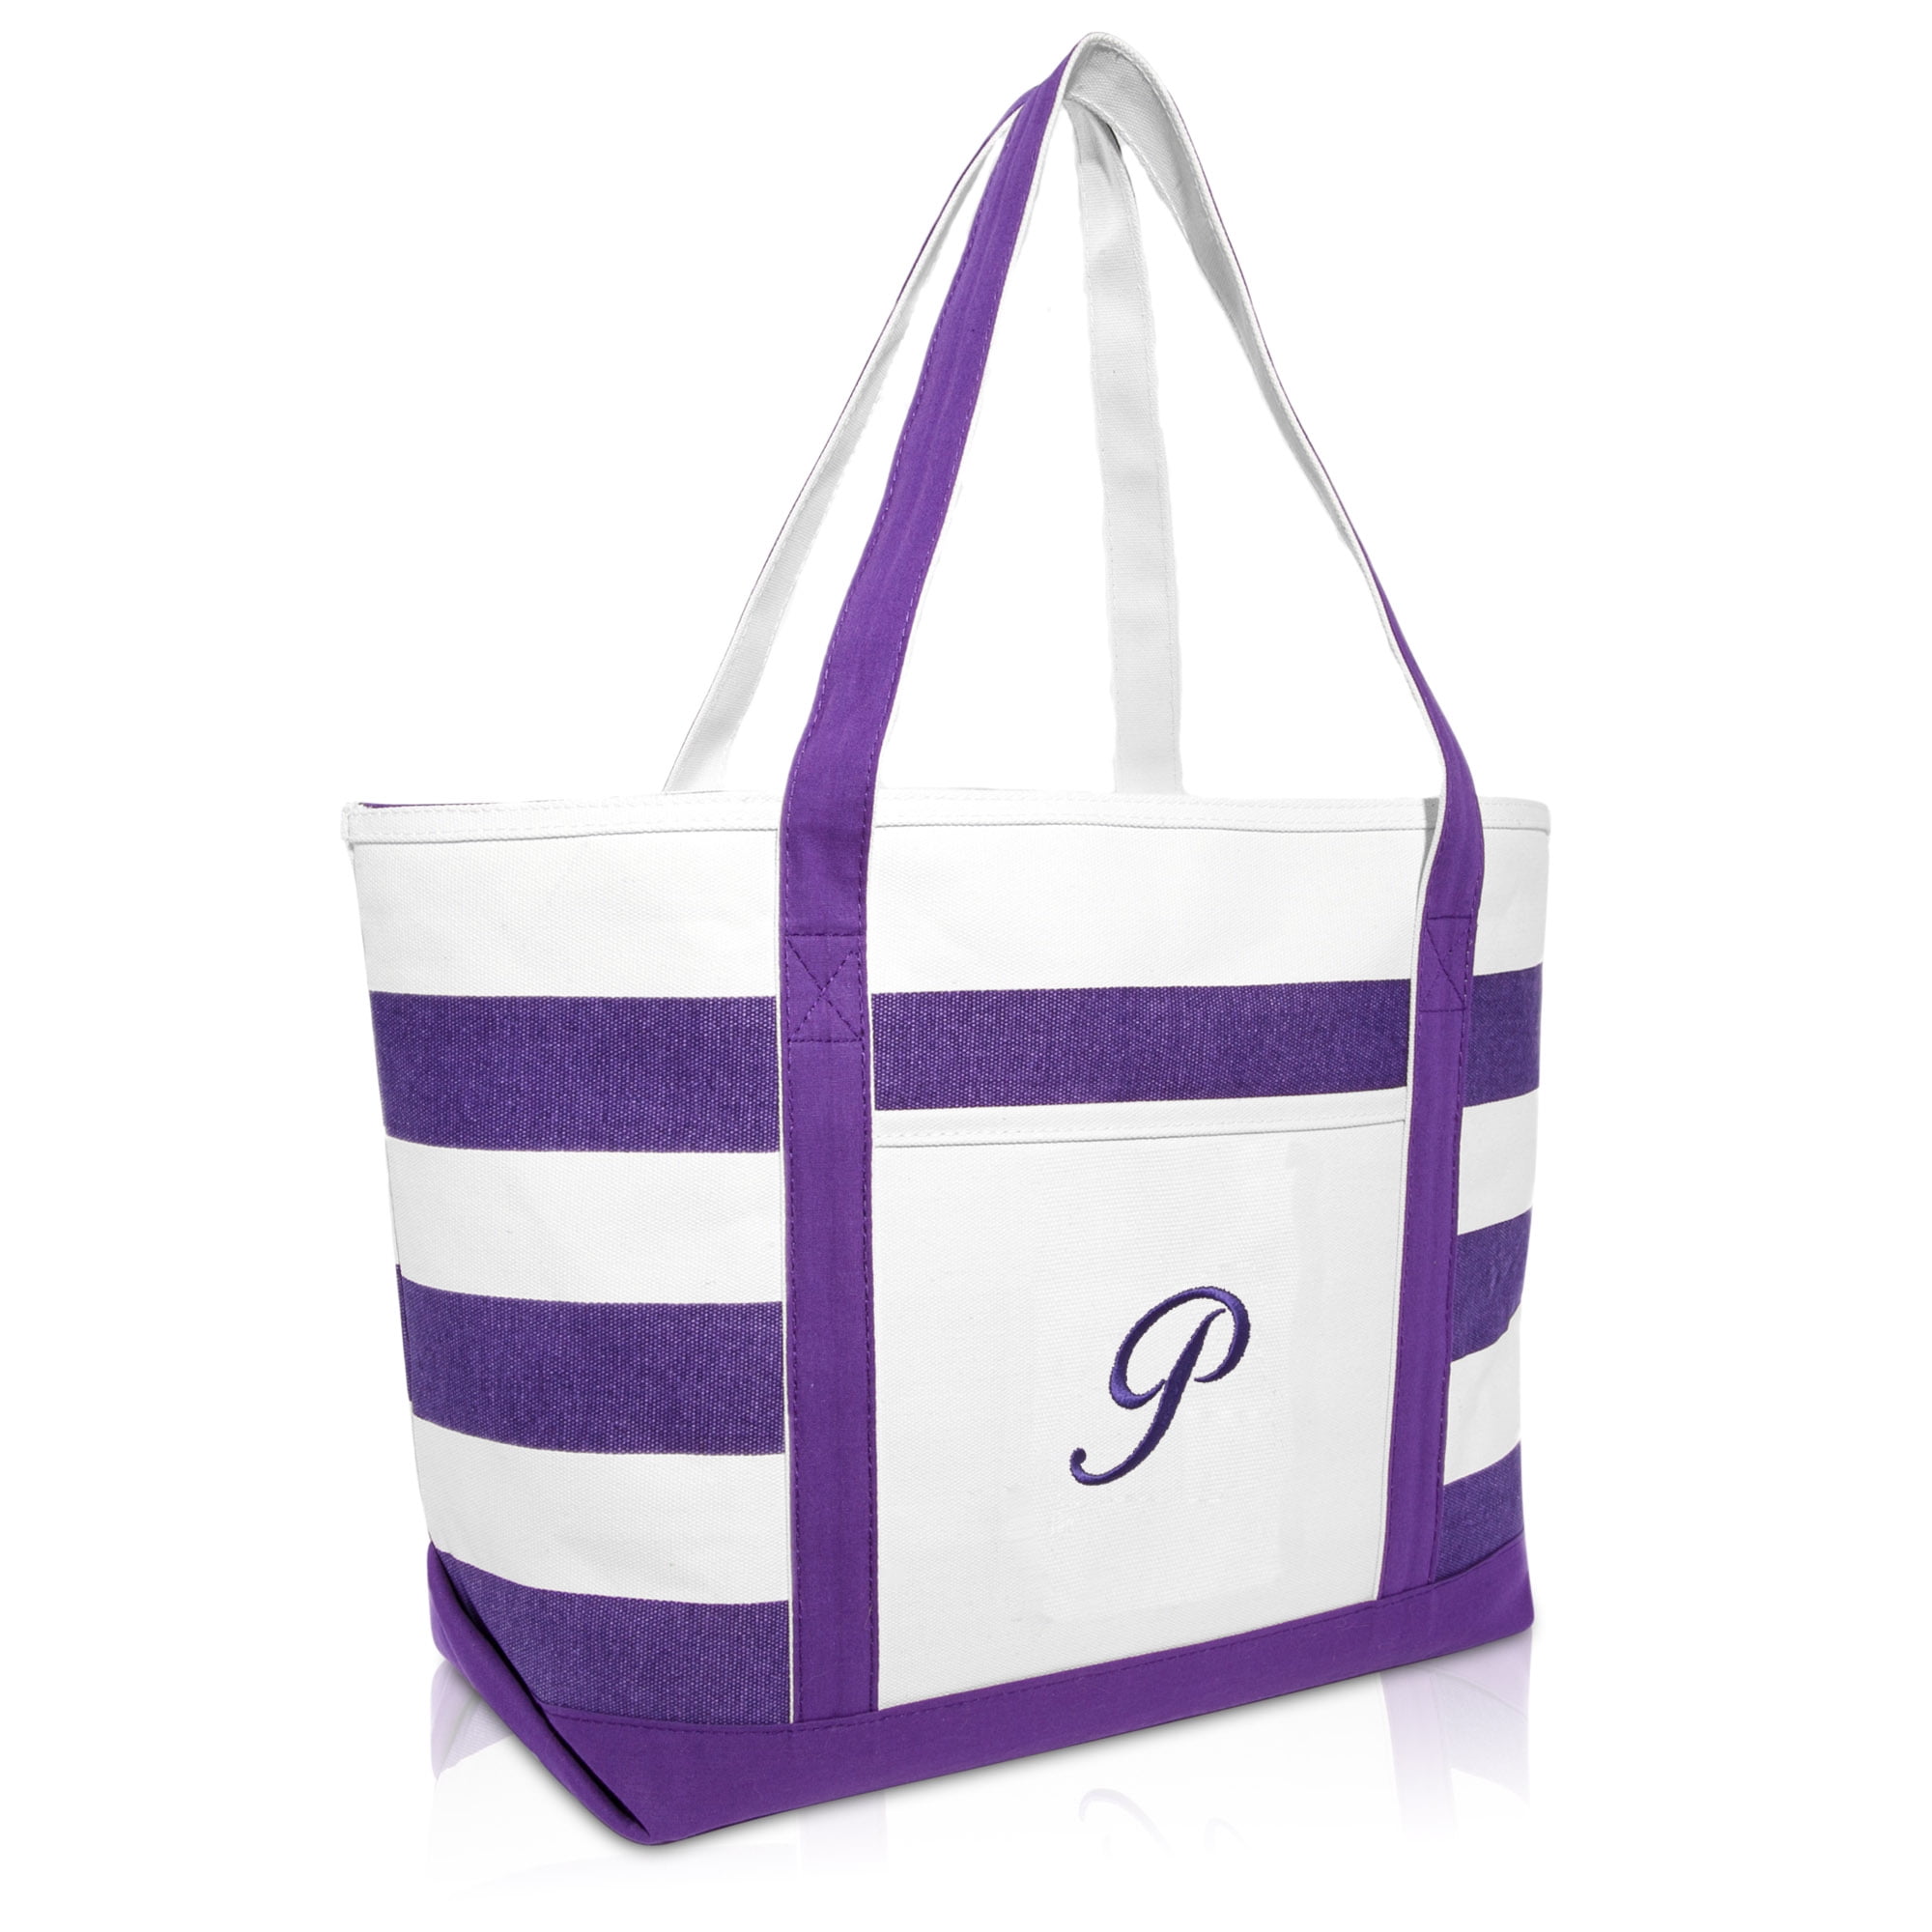 DALIX Monogrammed Beach Bag and Totes for Women Personalized Gifts Purple P - 0 ...